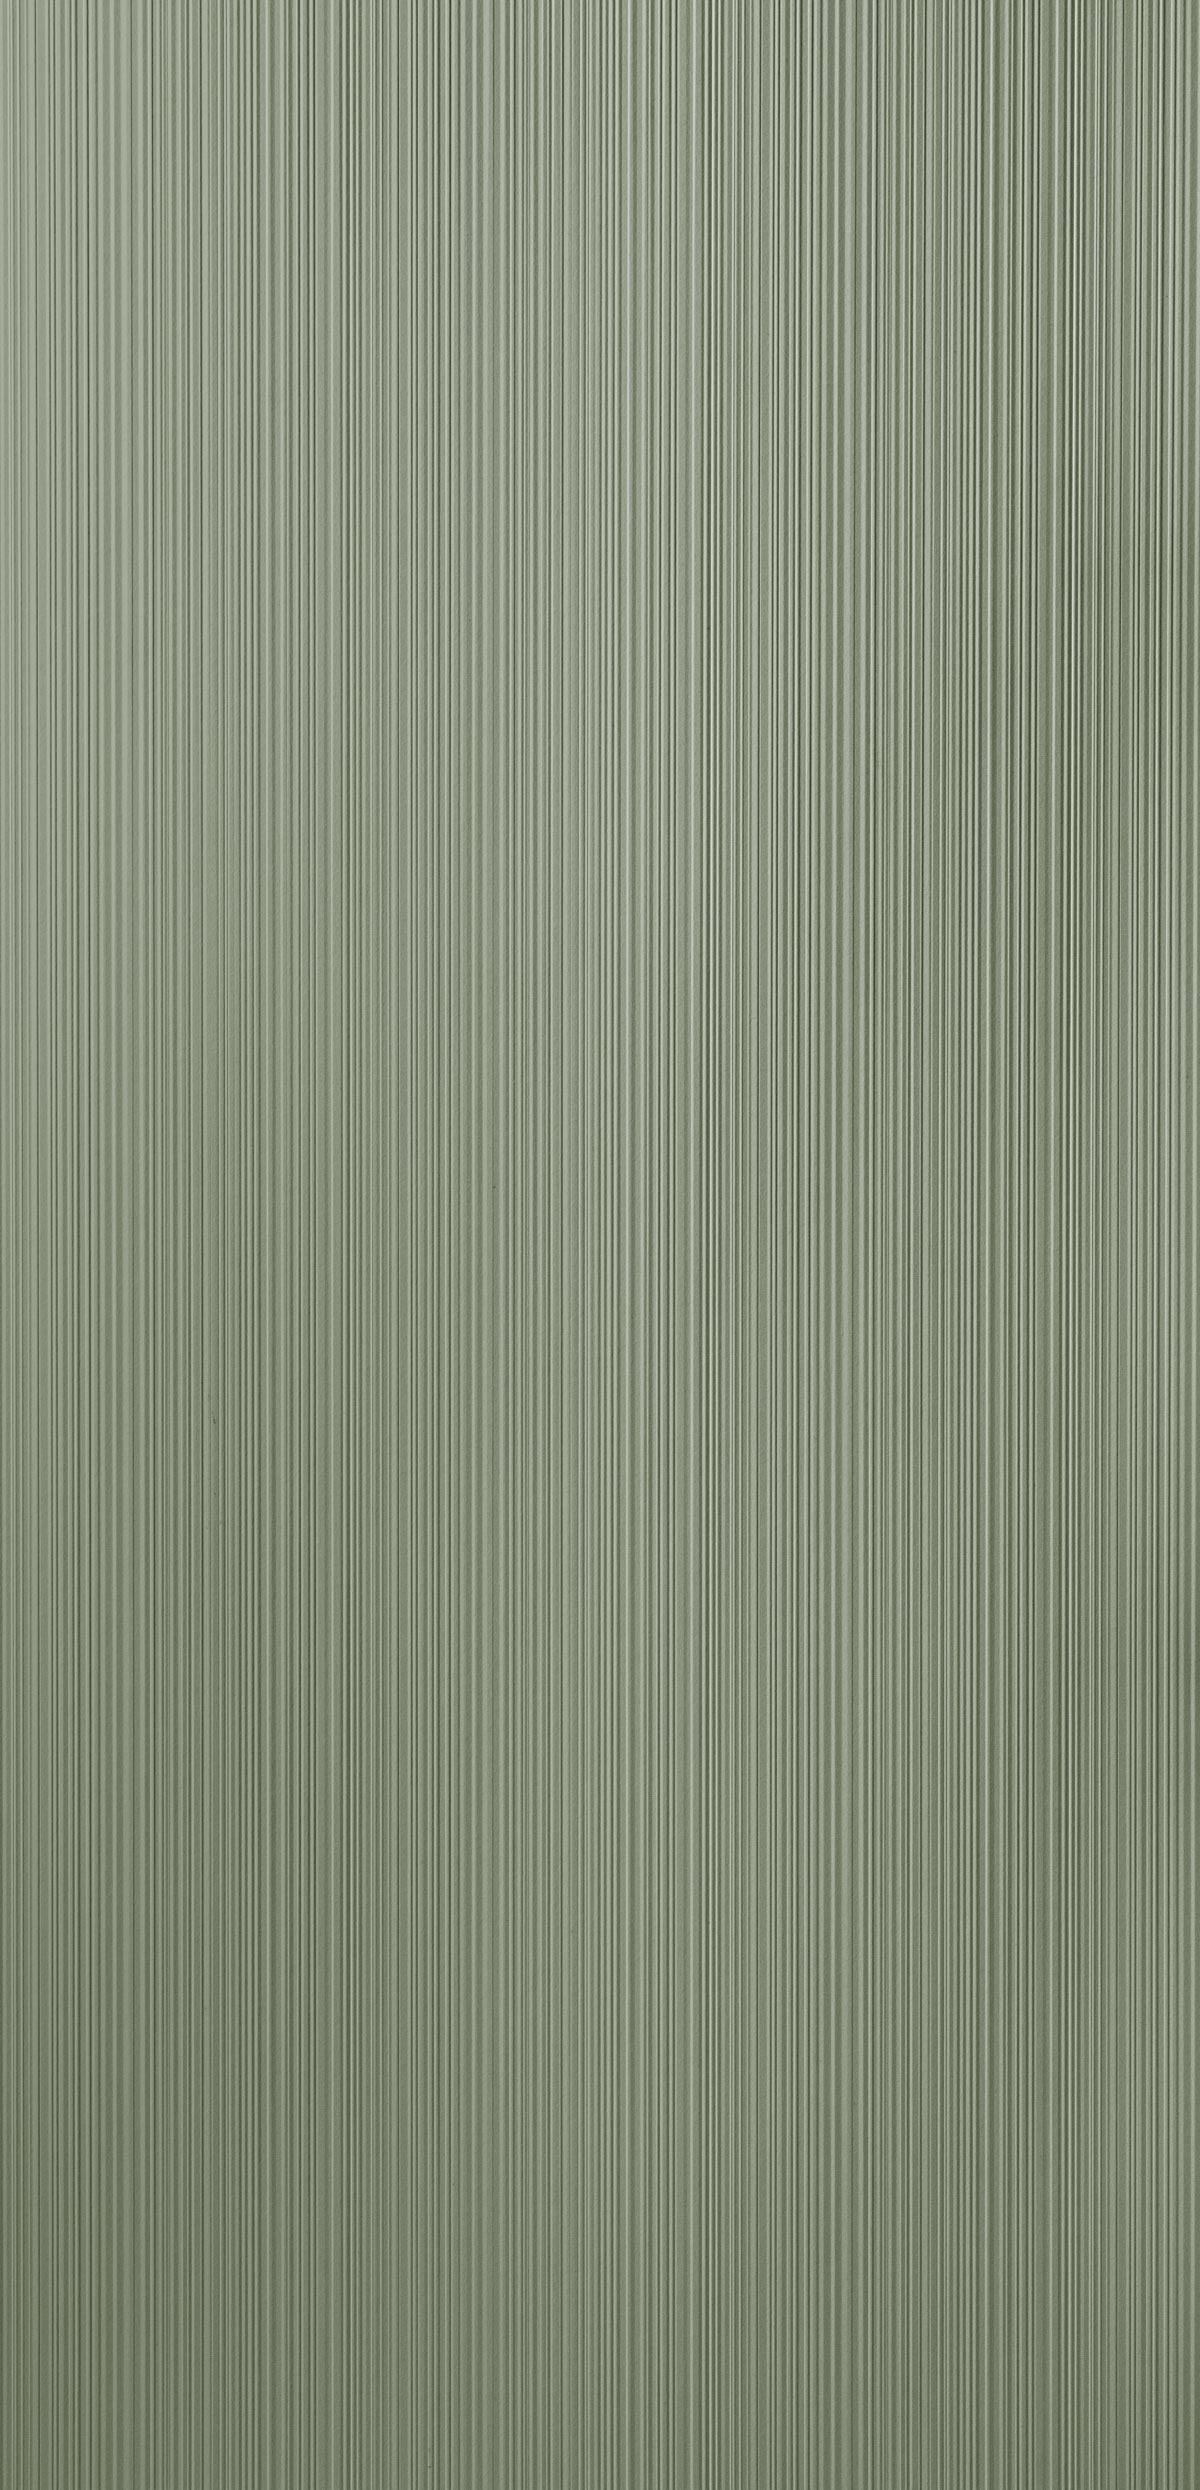 Lines Pale green 018-panel